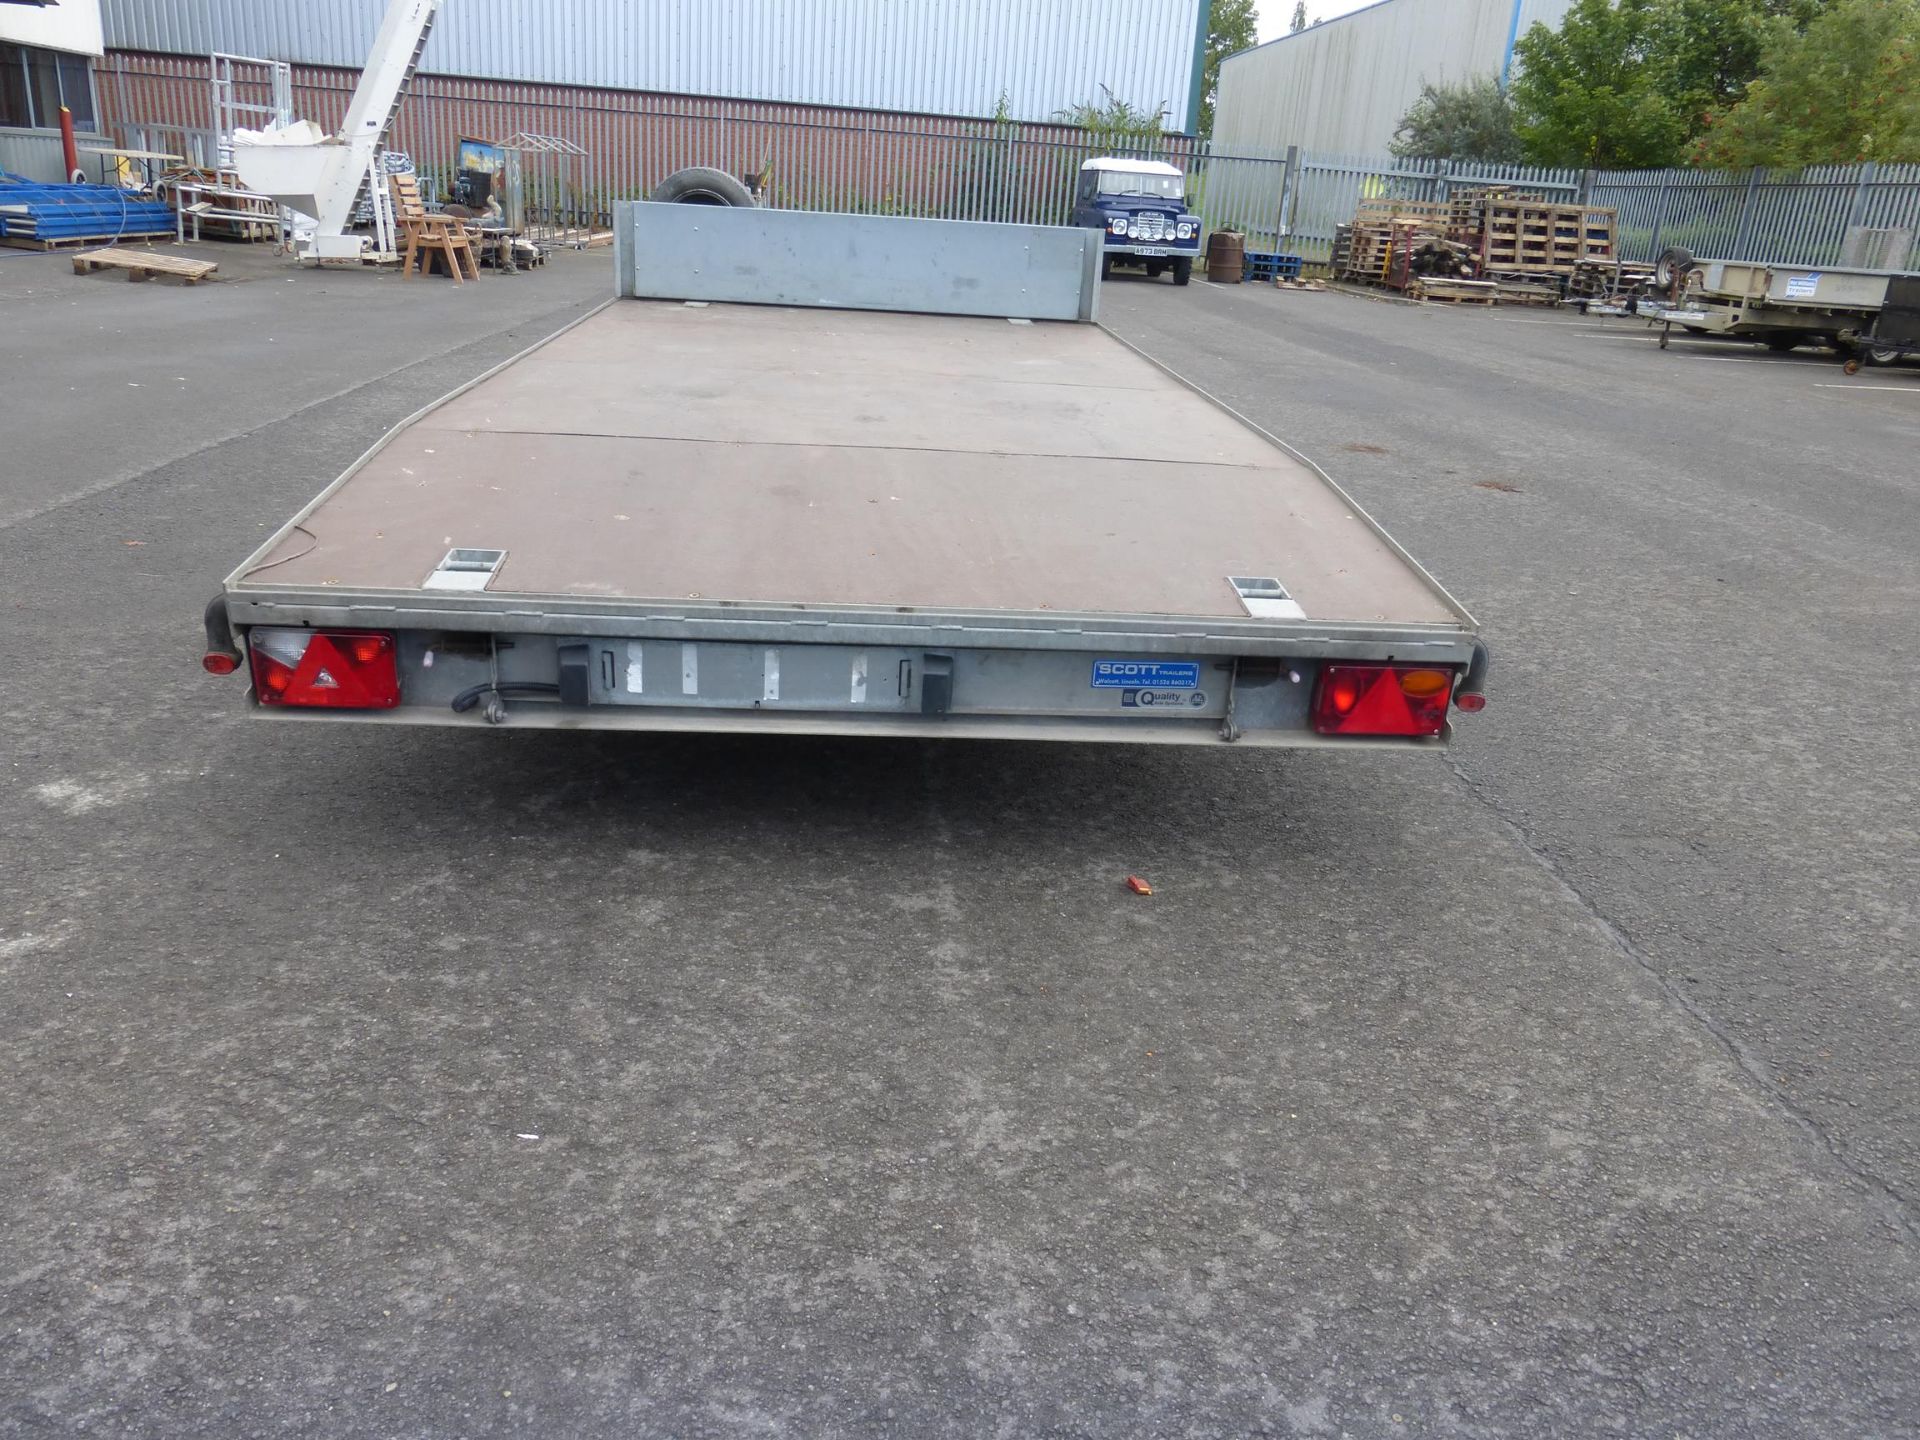 Graham Edwards 2012 Model BT3014 Flat Bed Galvanised Twin Axle Trailer, Vin No: SDXBT32DB13011665. - Image 8 of 9